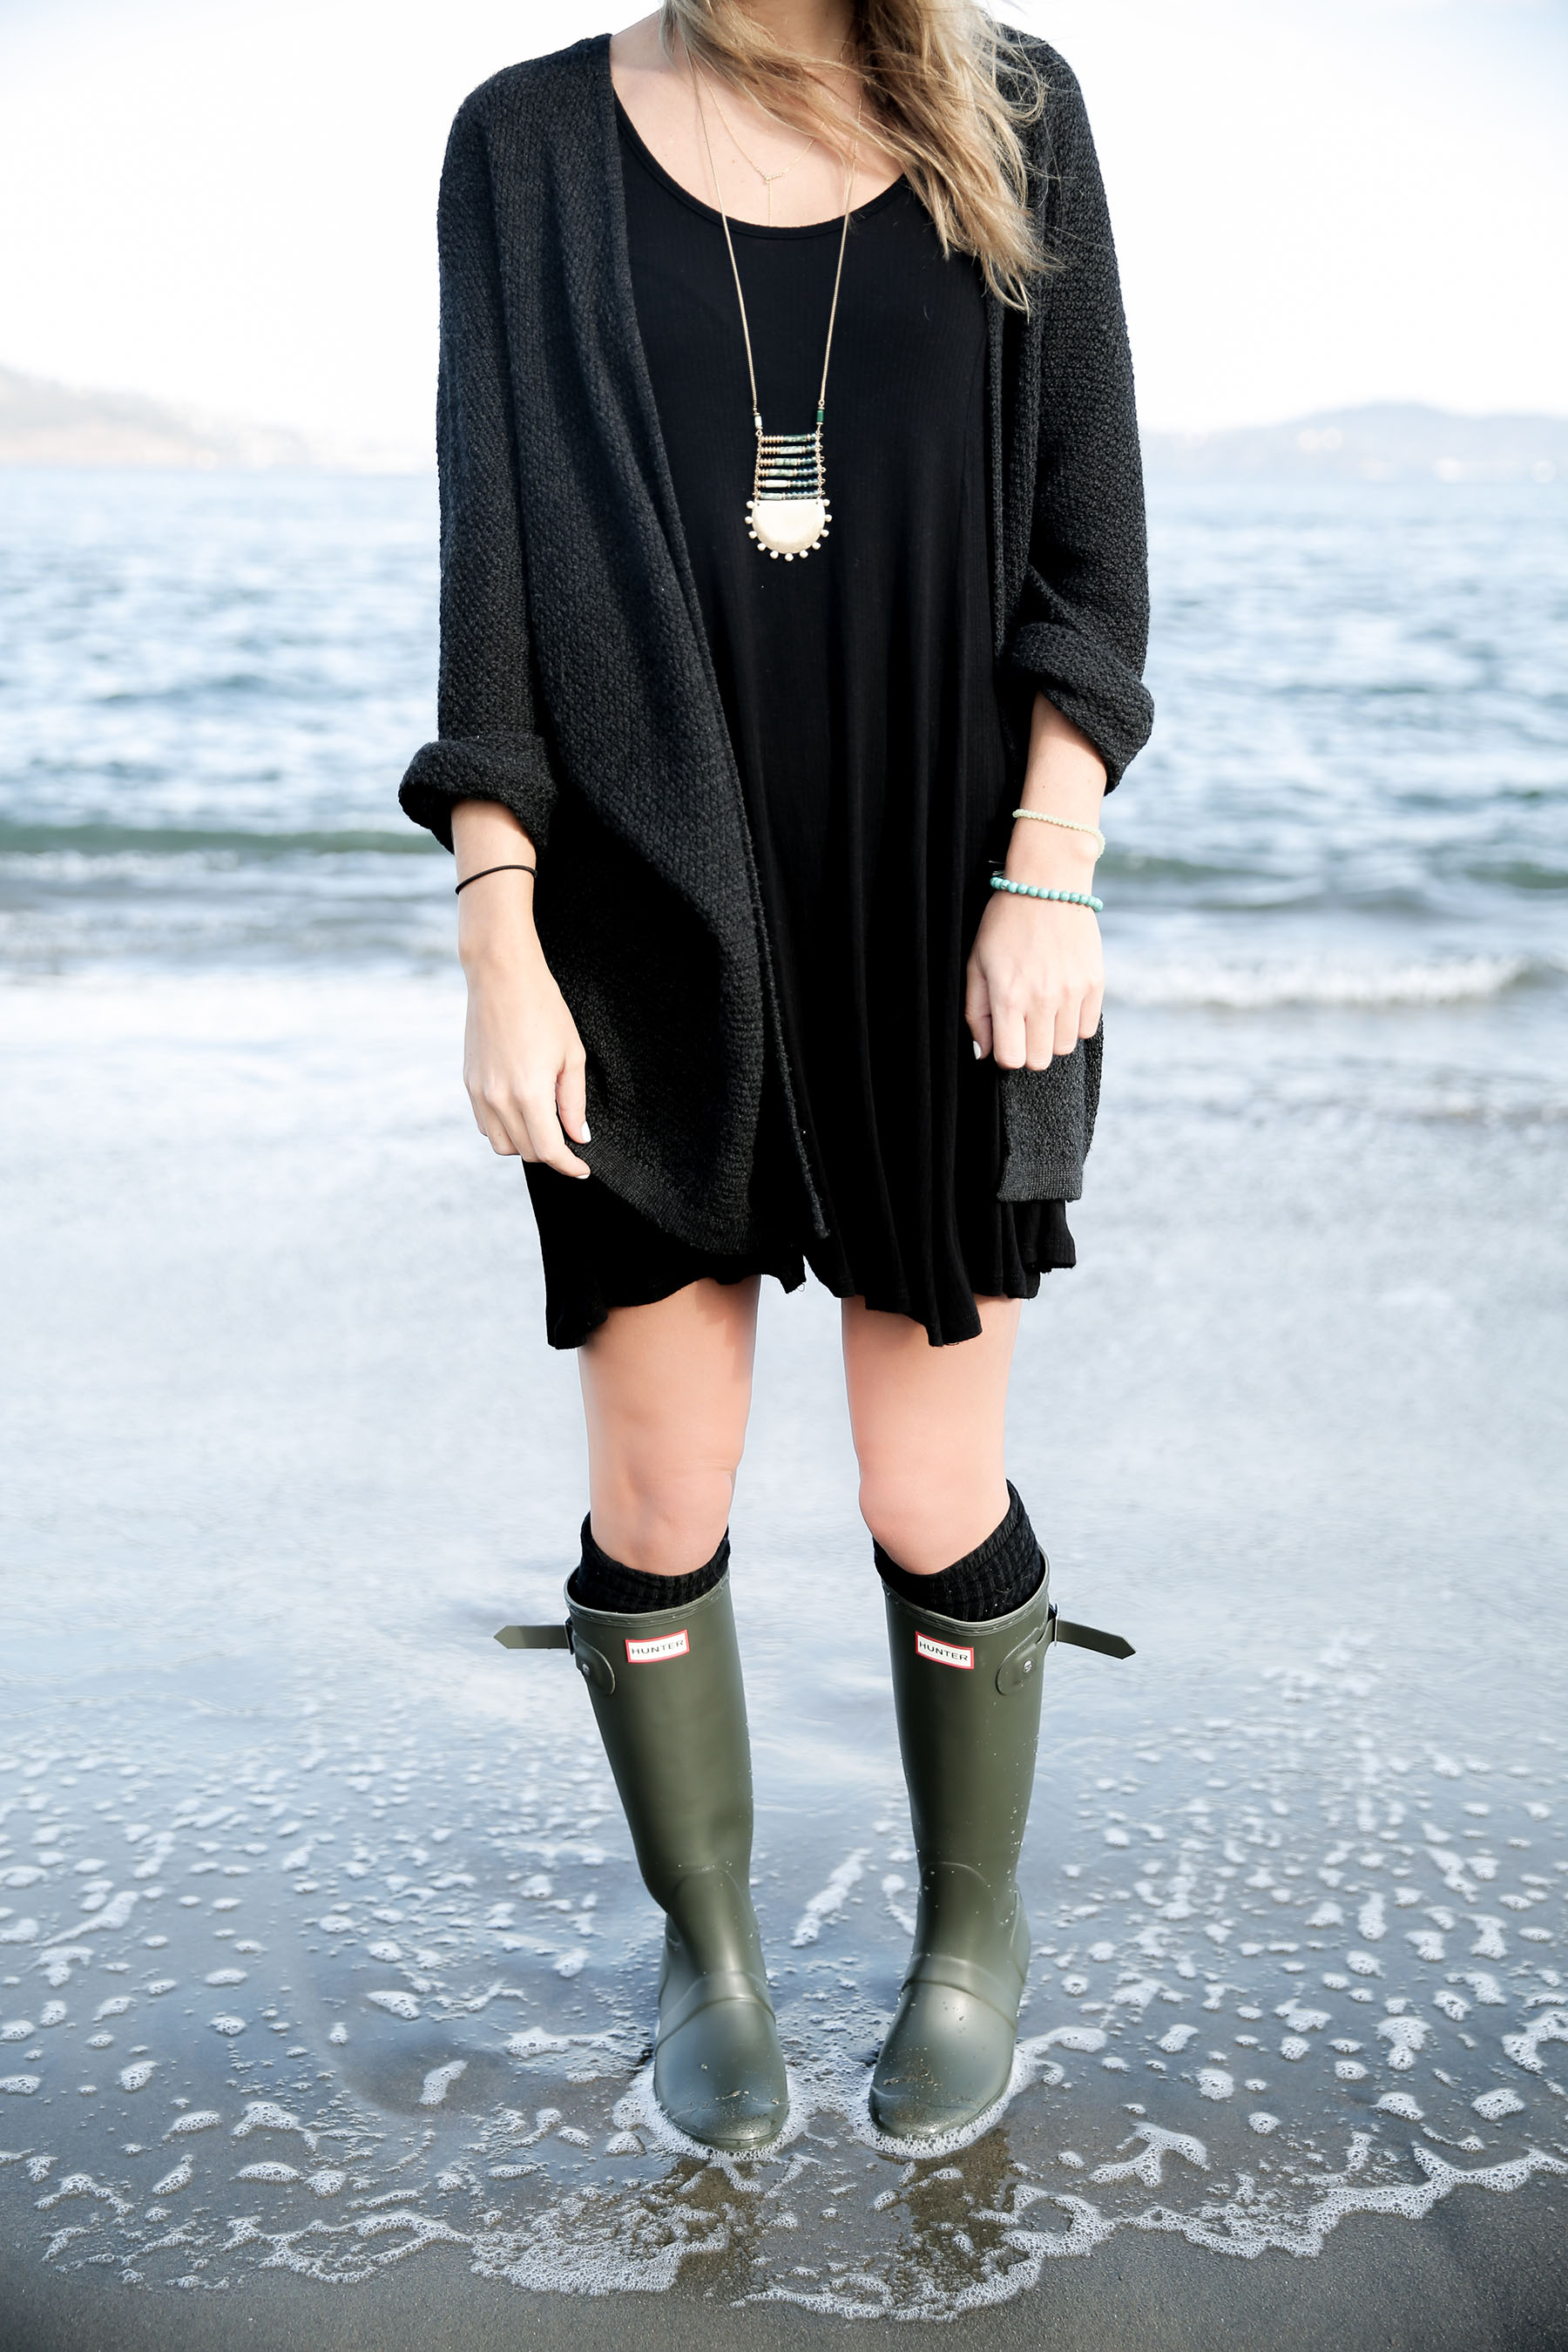 How to Wear Hunter Boots When It's Not Raining